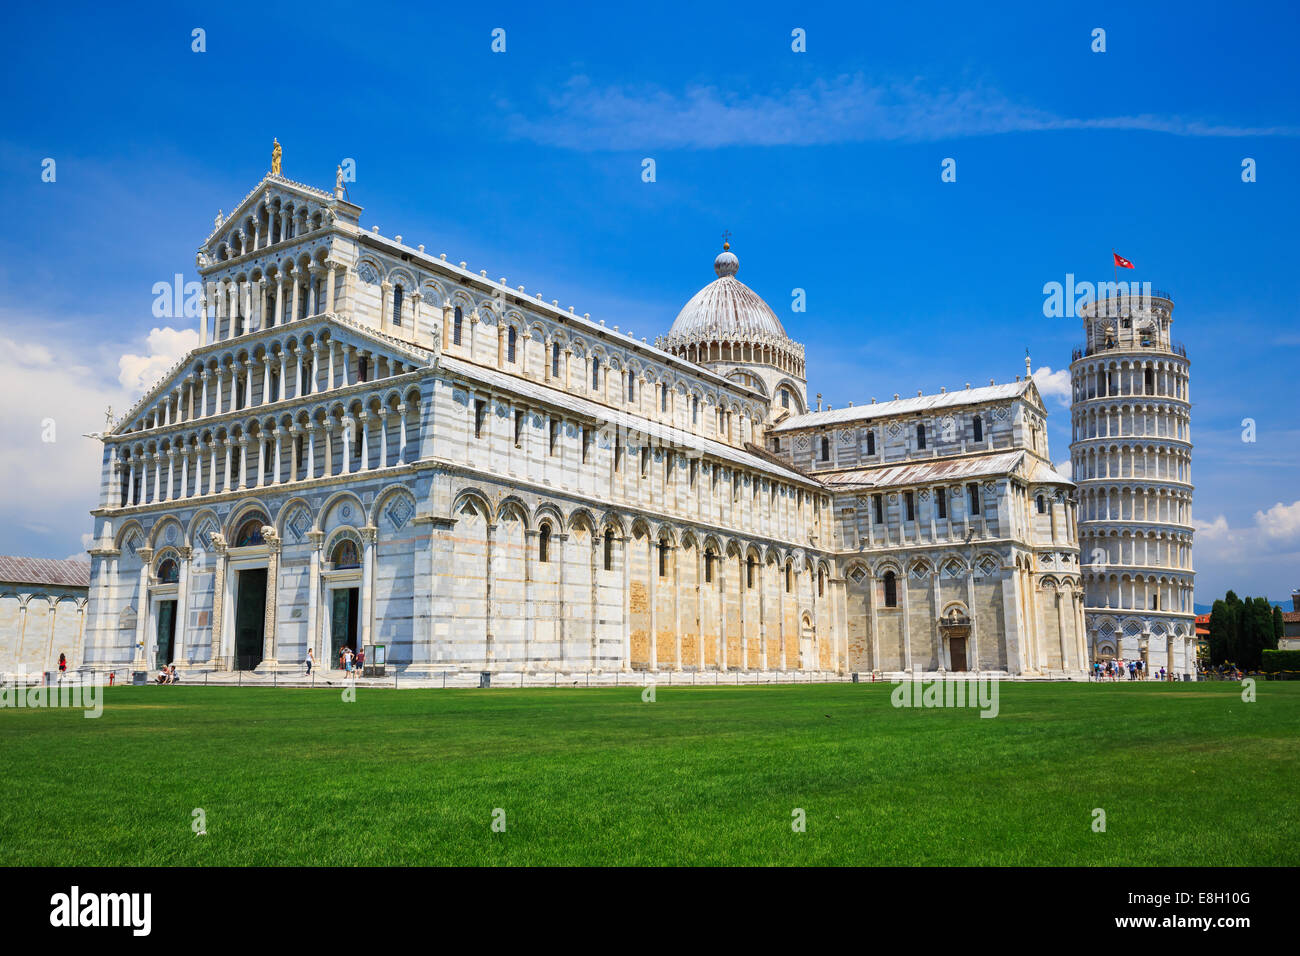 Leaning tower, Pisa Italy Stock Photo